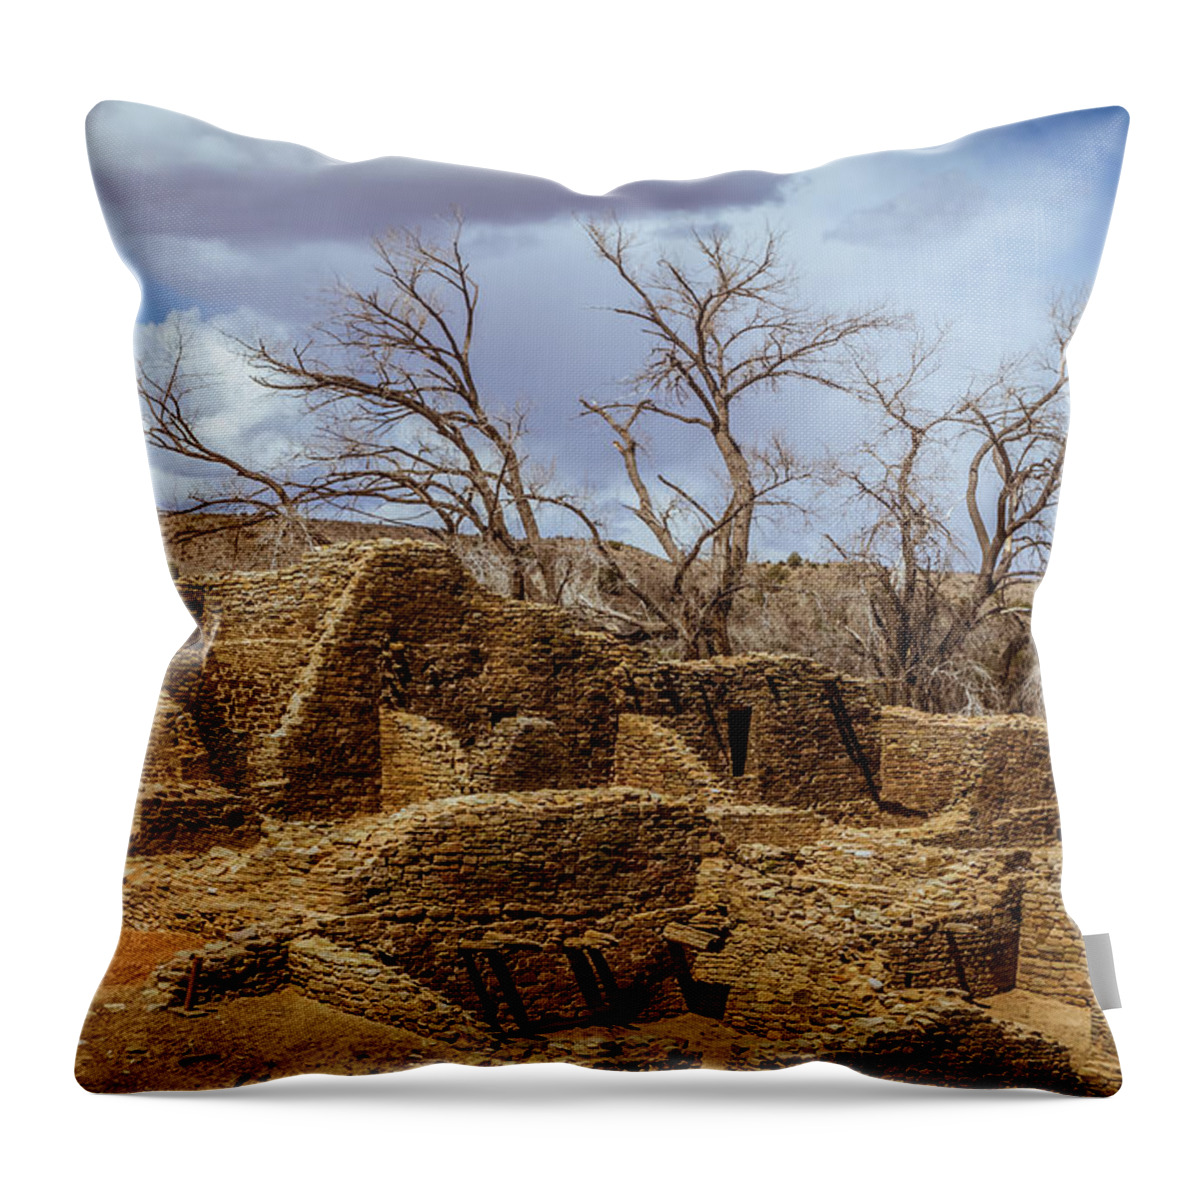 Aztec Throw Pillow featuring the photograph Aztec Ruins, New Mexico by Ron Pate